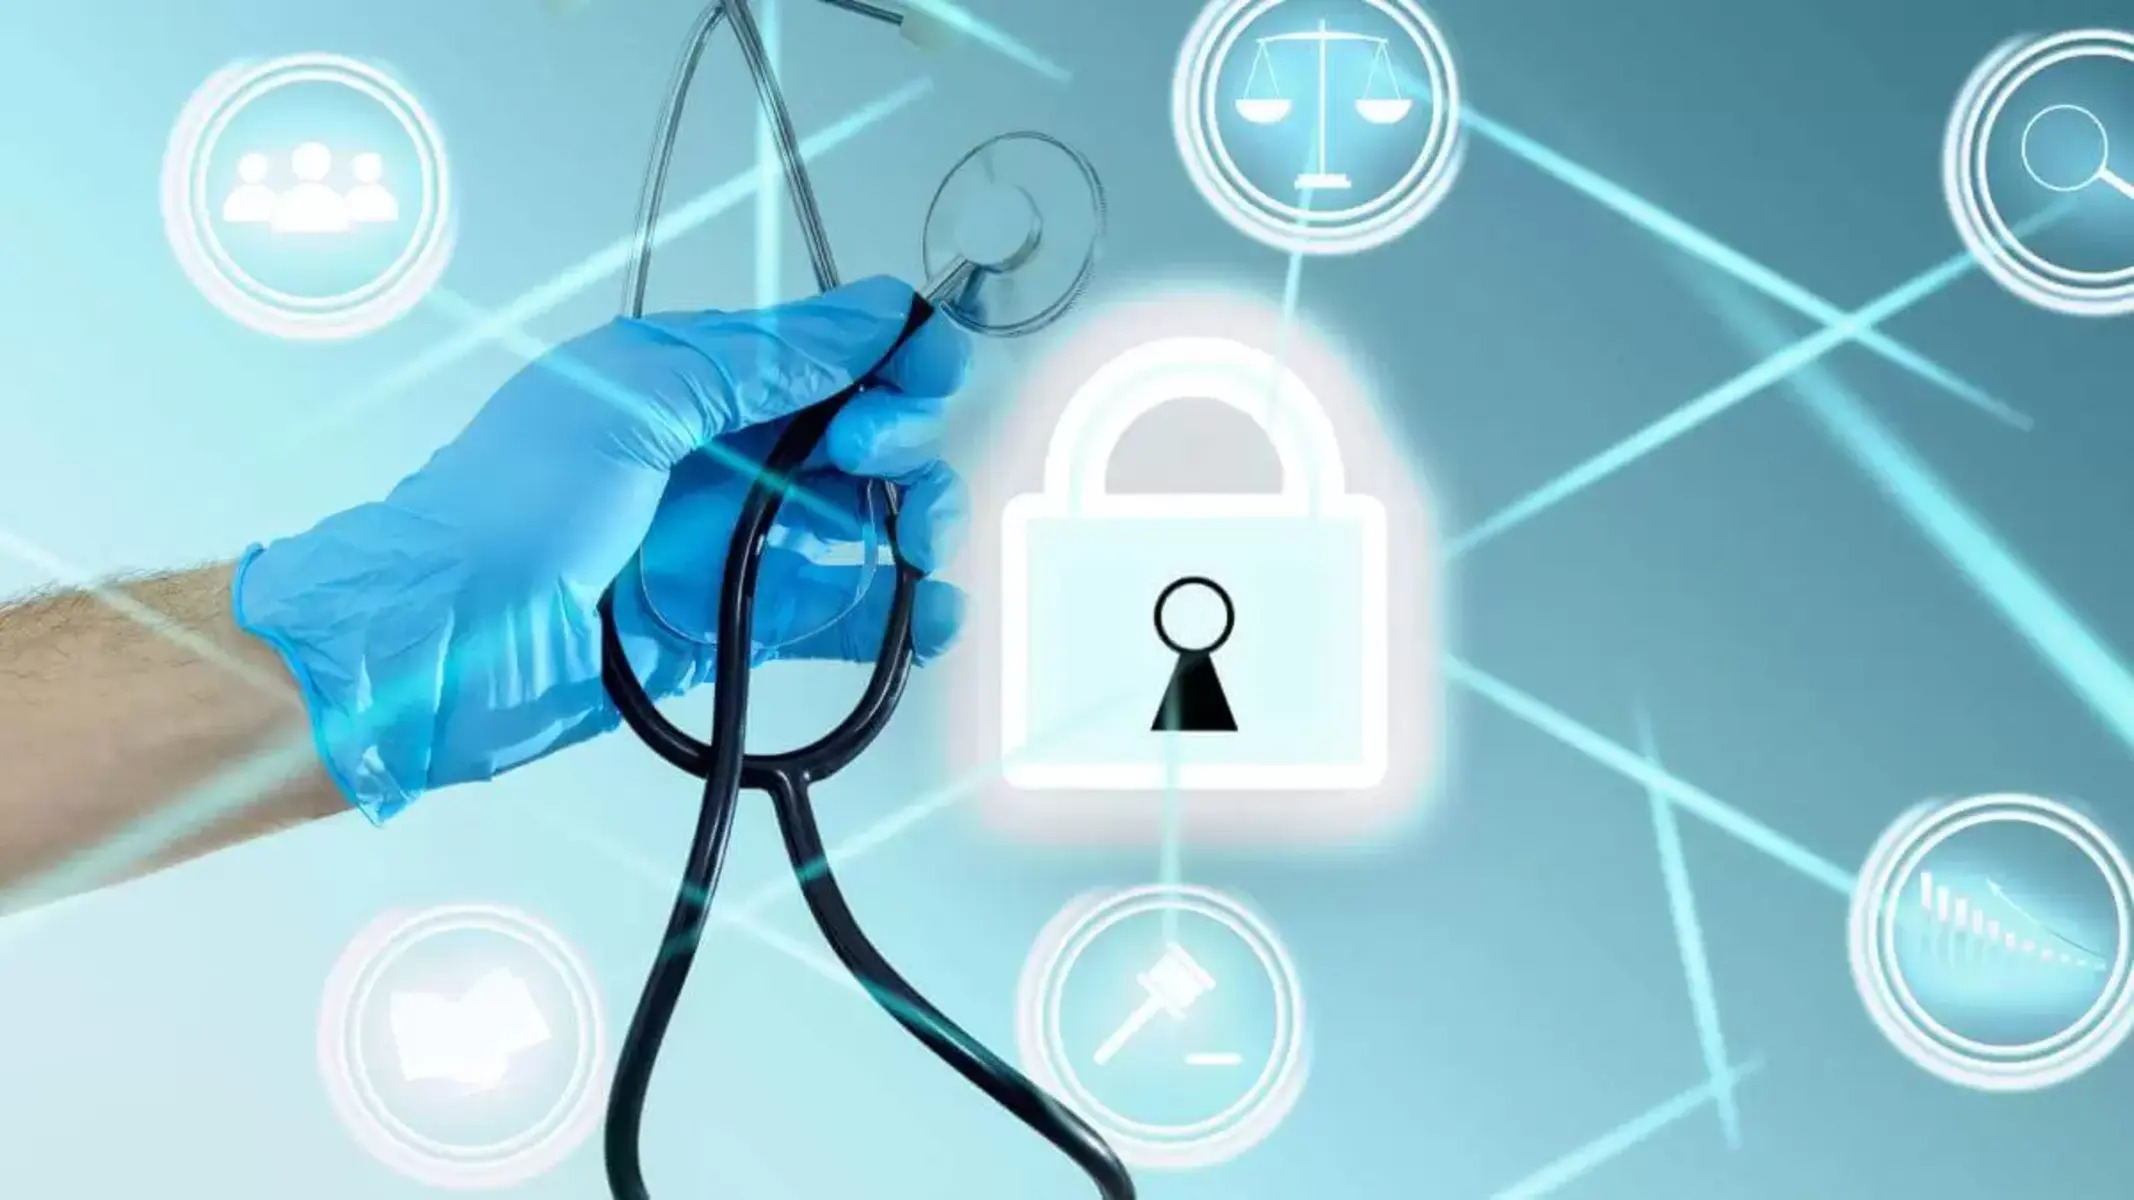 What Are The Benefits Of Internet Security In The Healthcare Workplace?